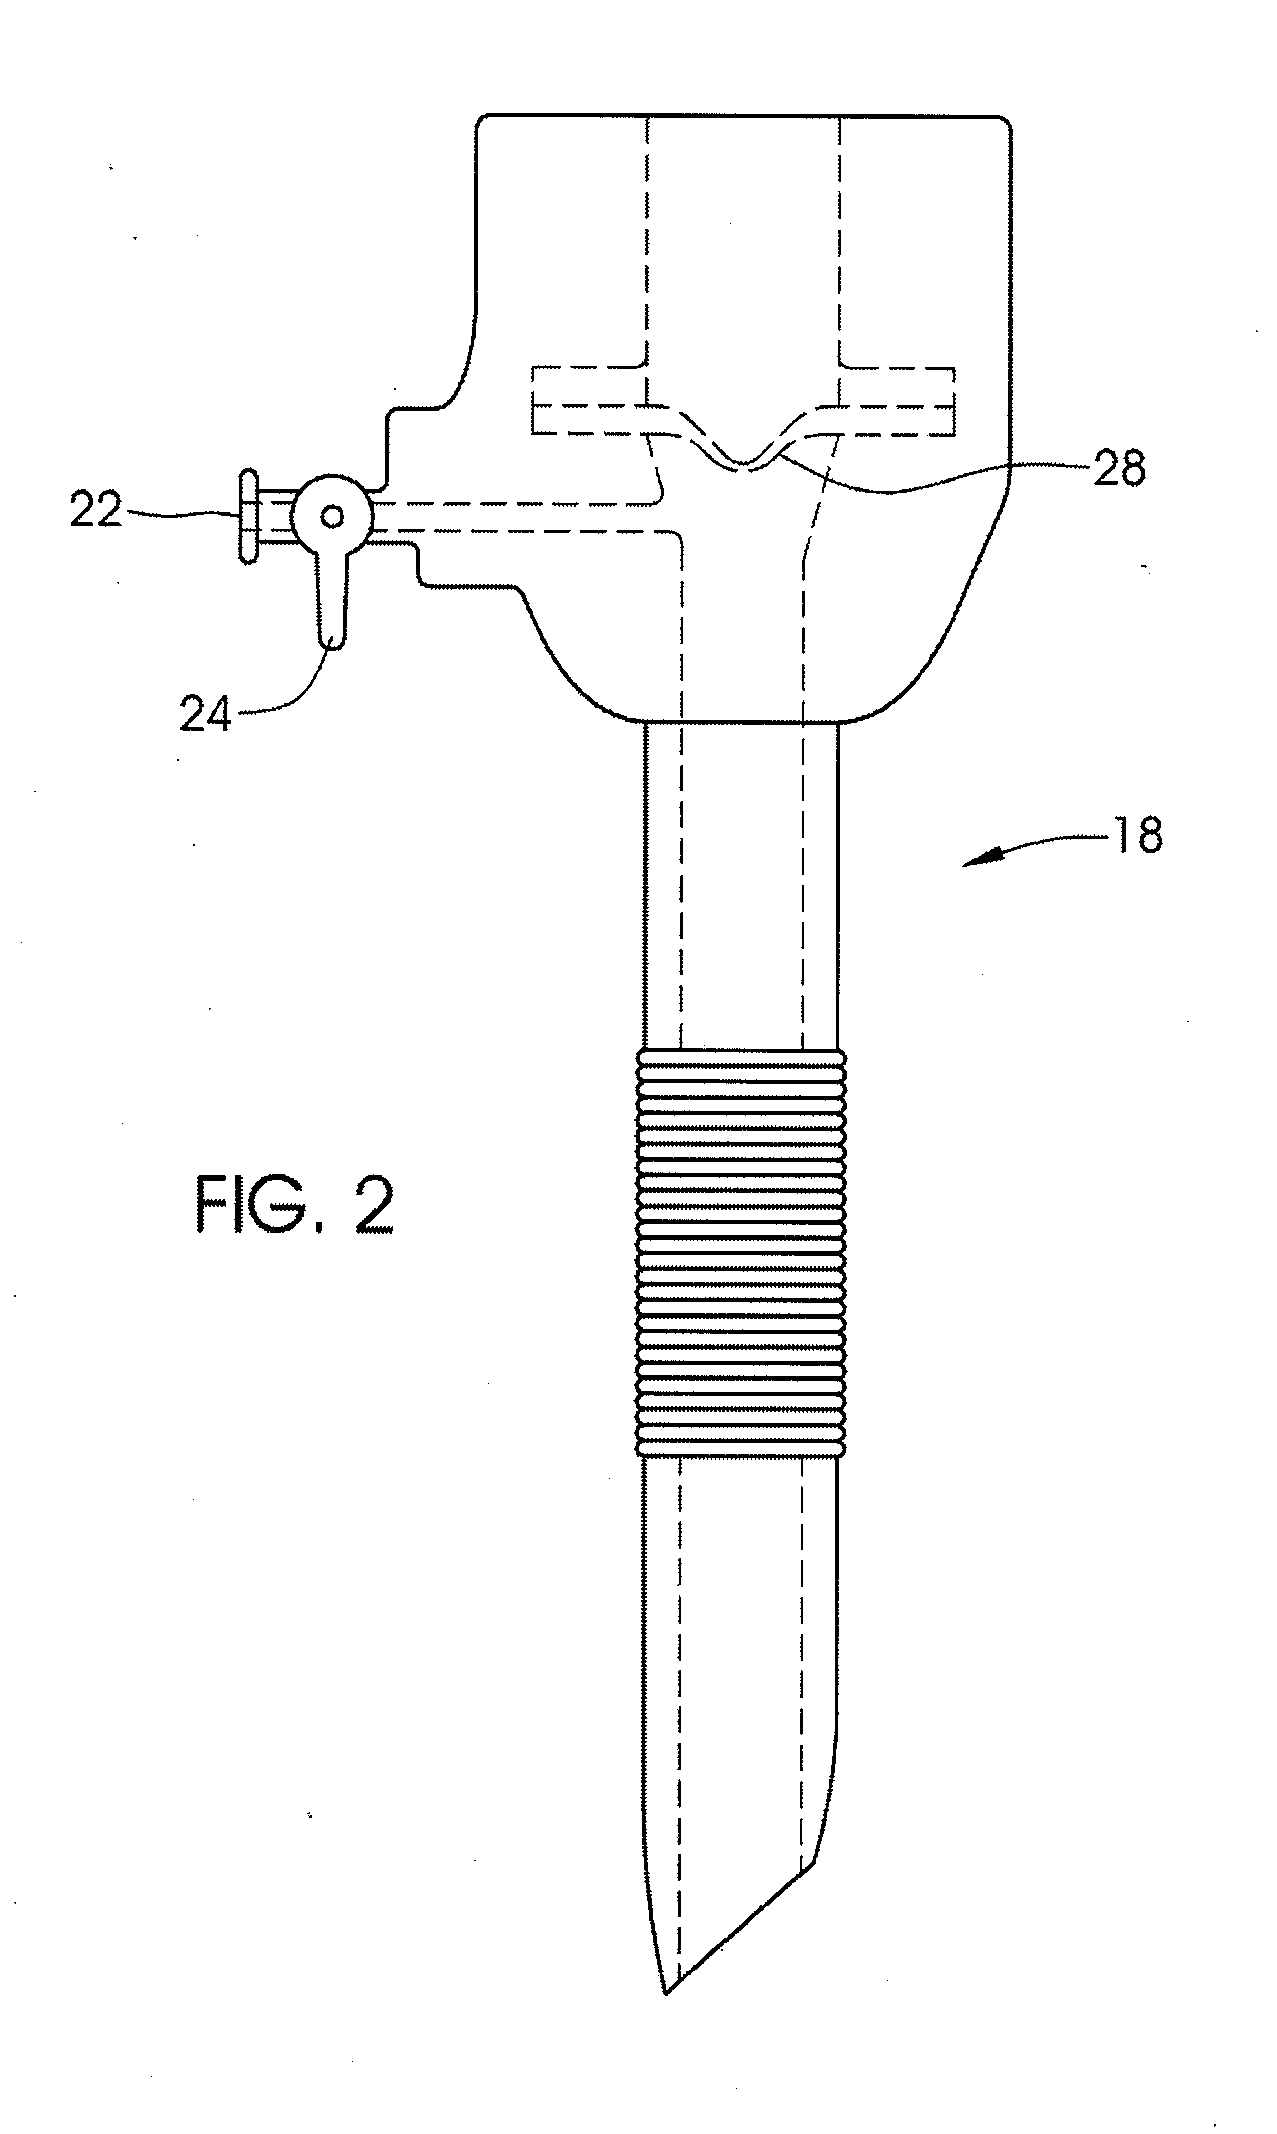 Method and apparatus for adjusting a gastrointestinal restriction device